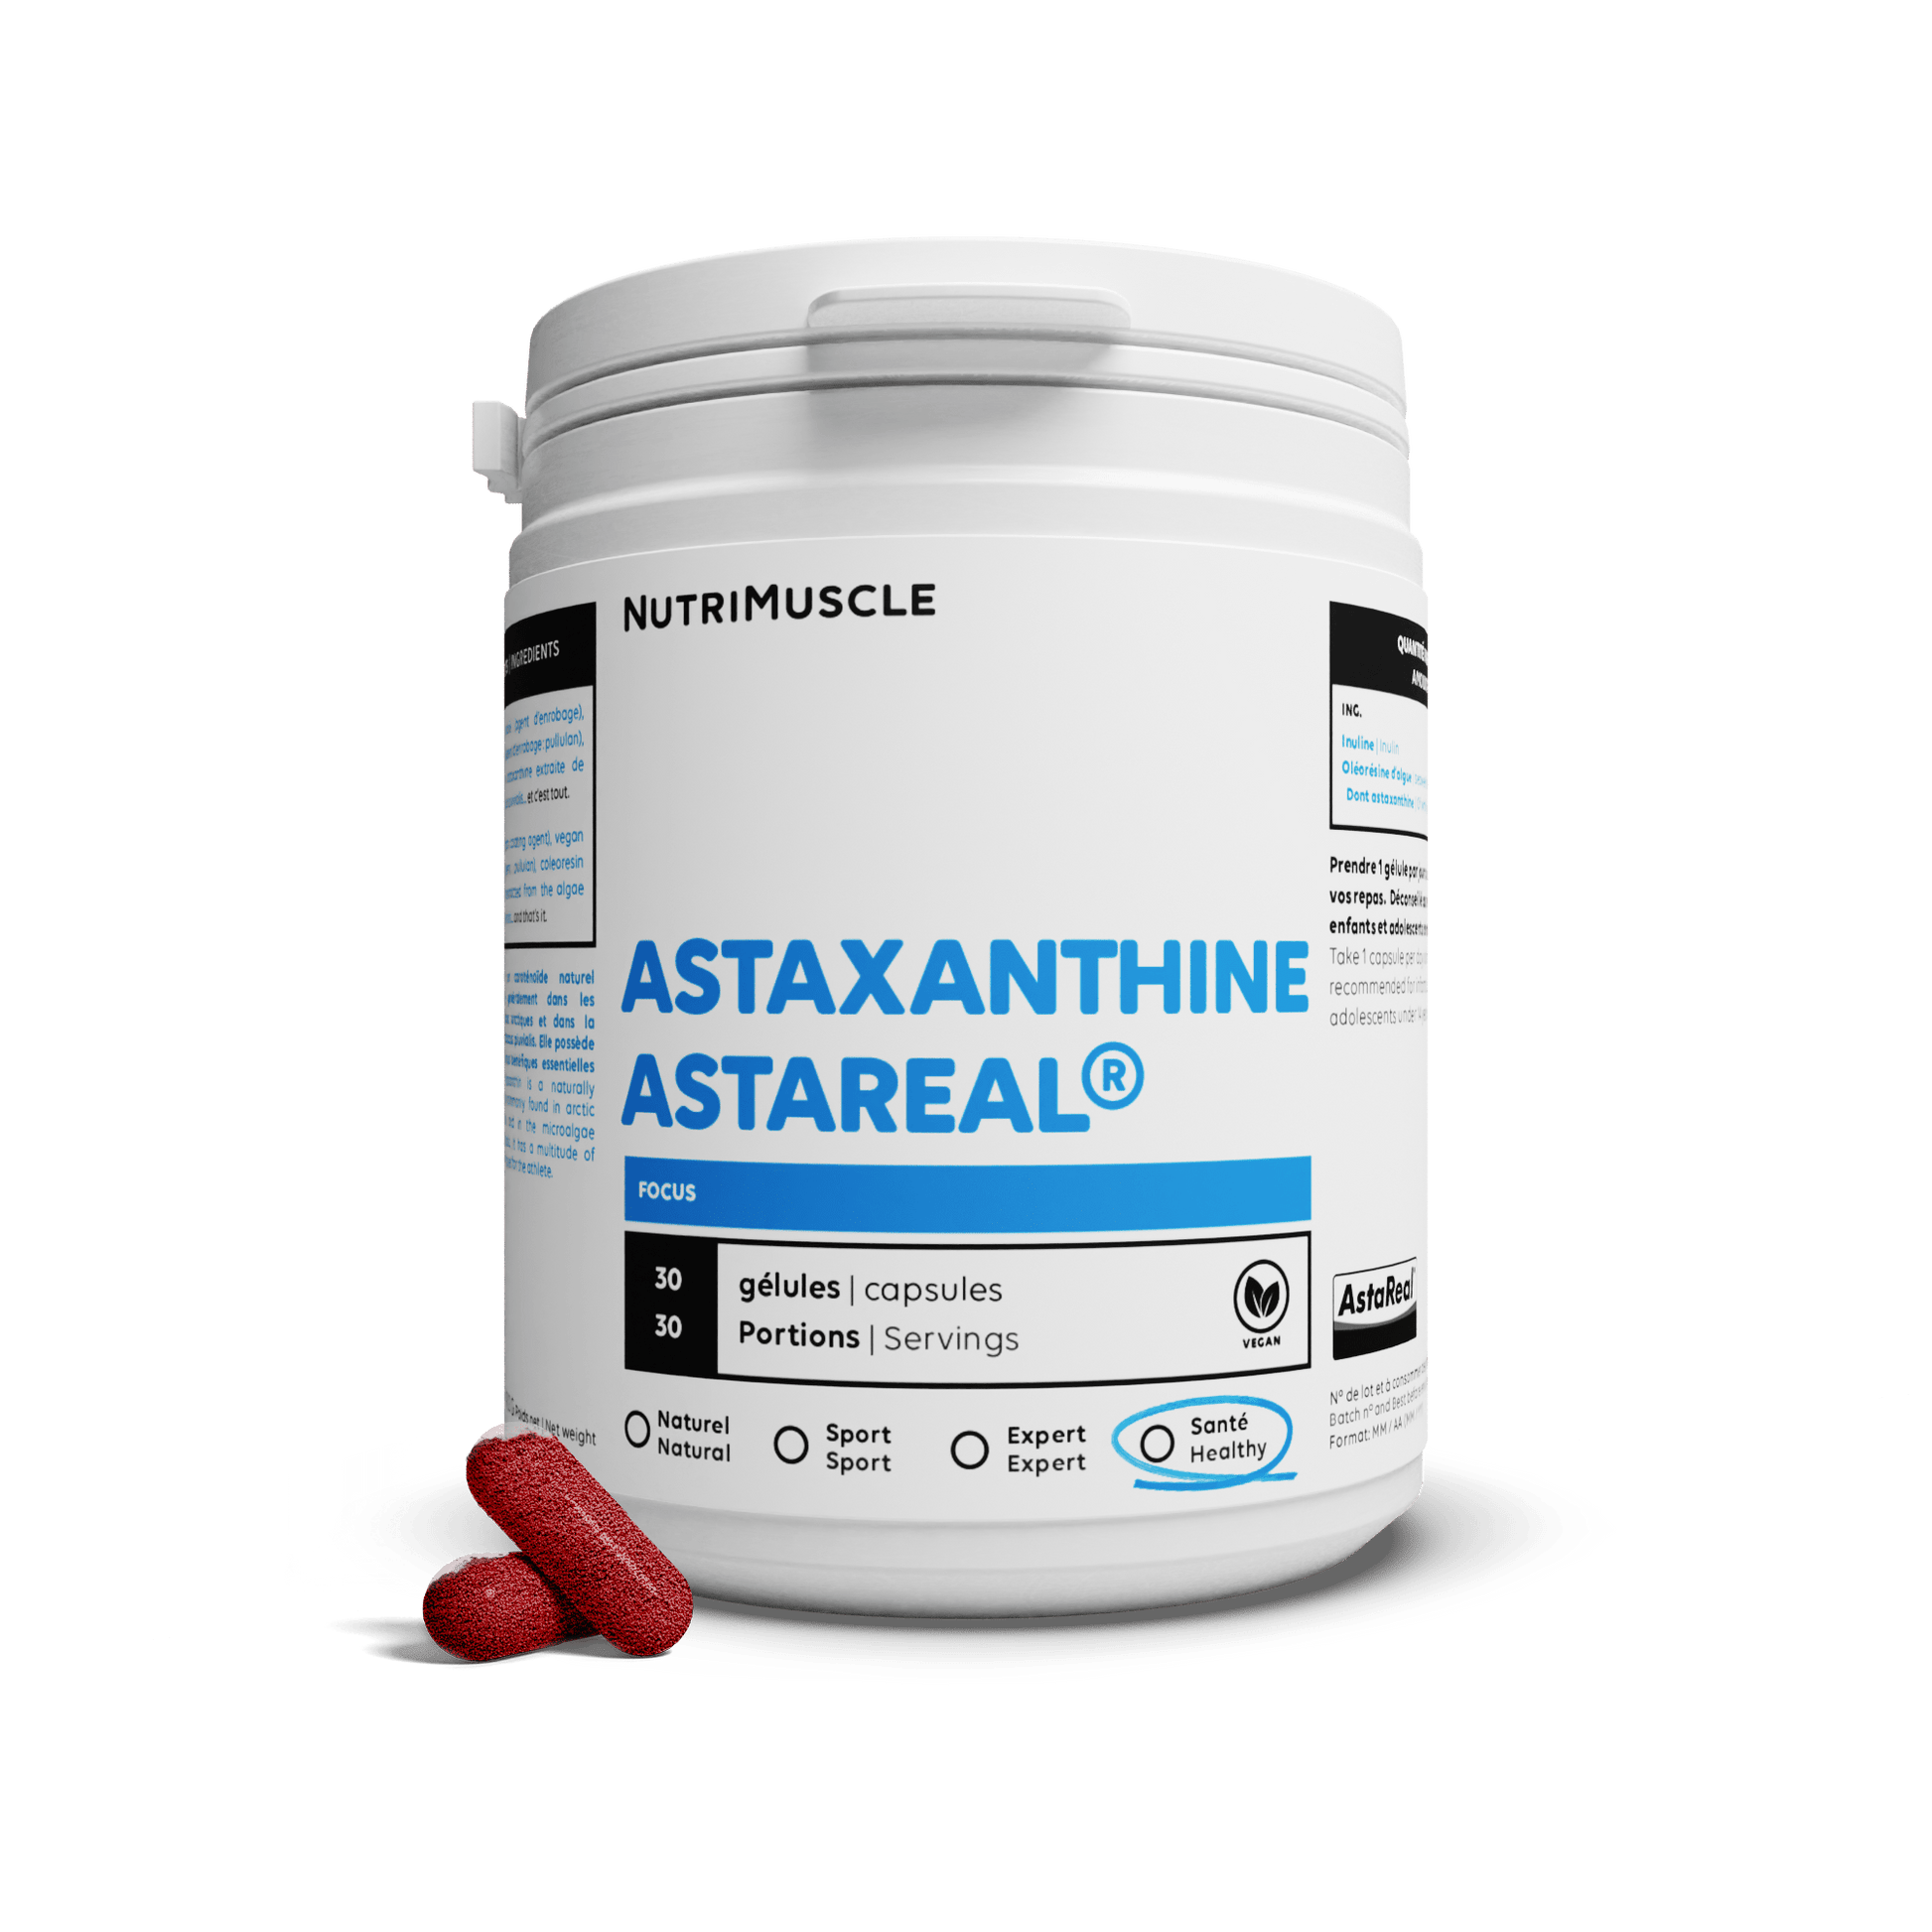 Nutrimuscle Nutriments 30 gélules Astaxanthine Astareal®